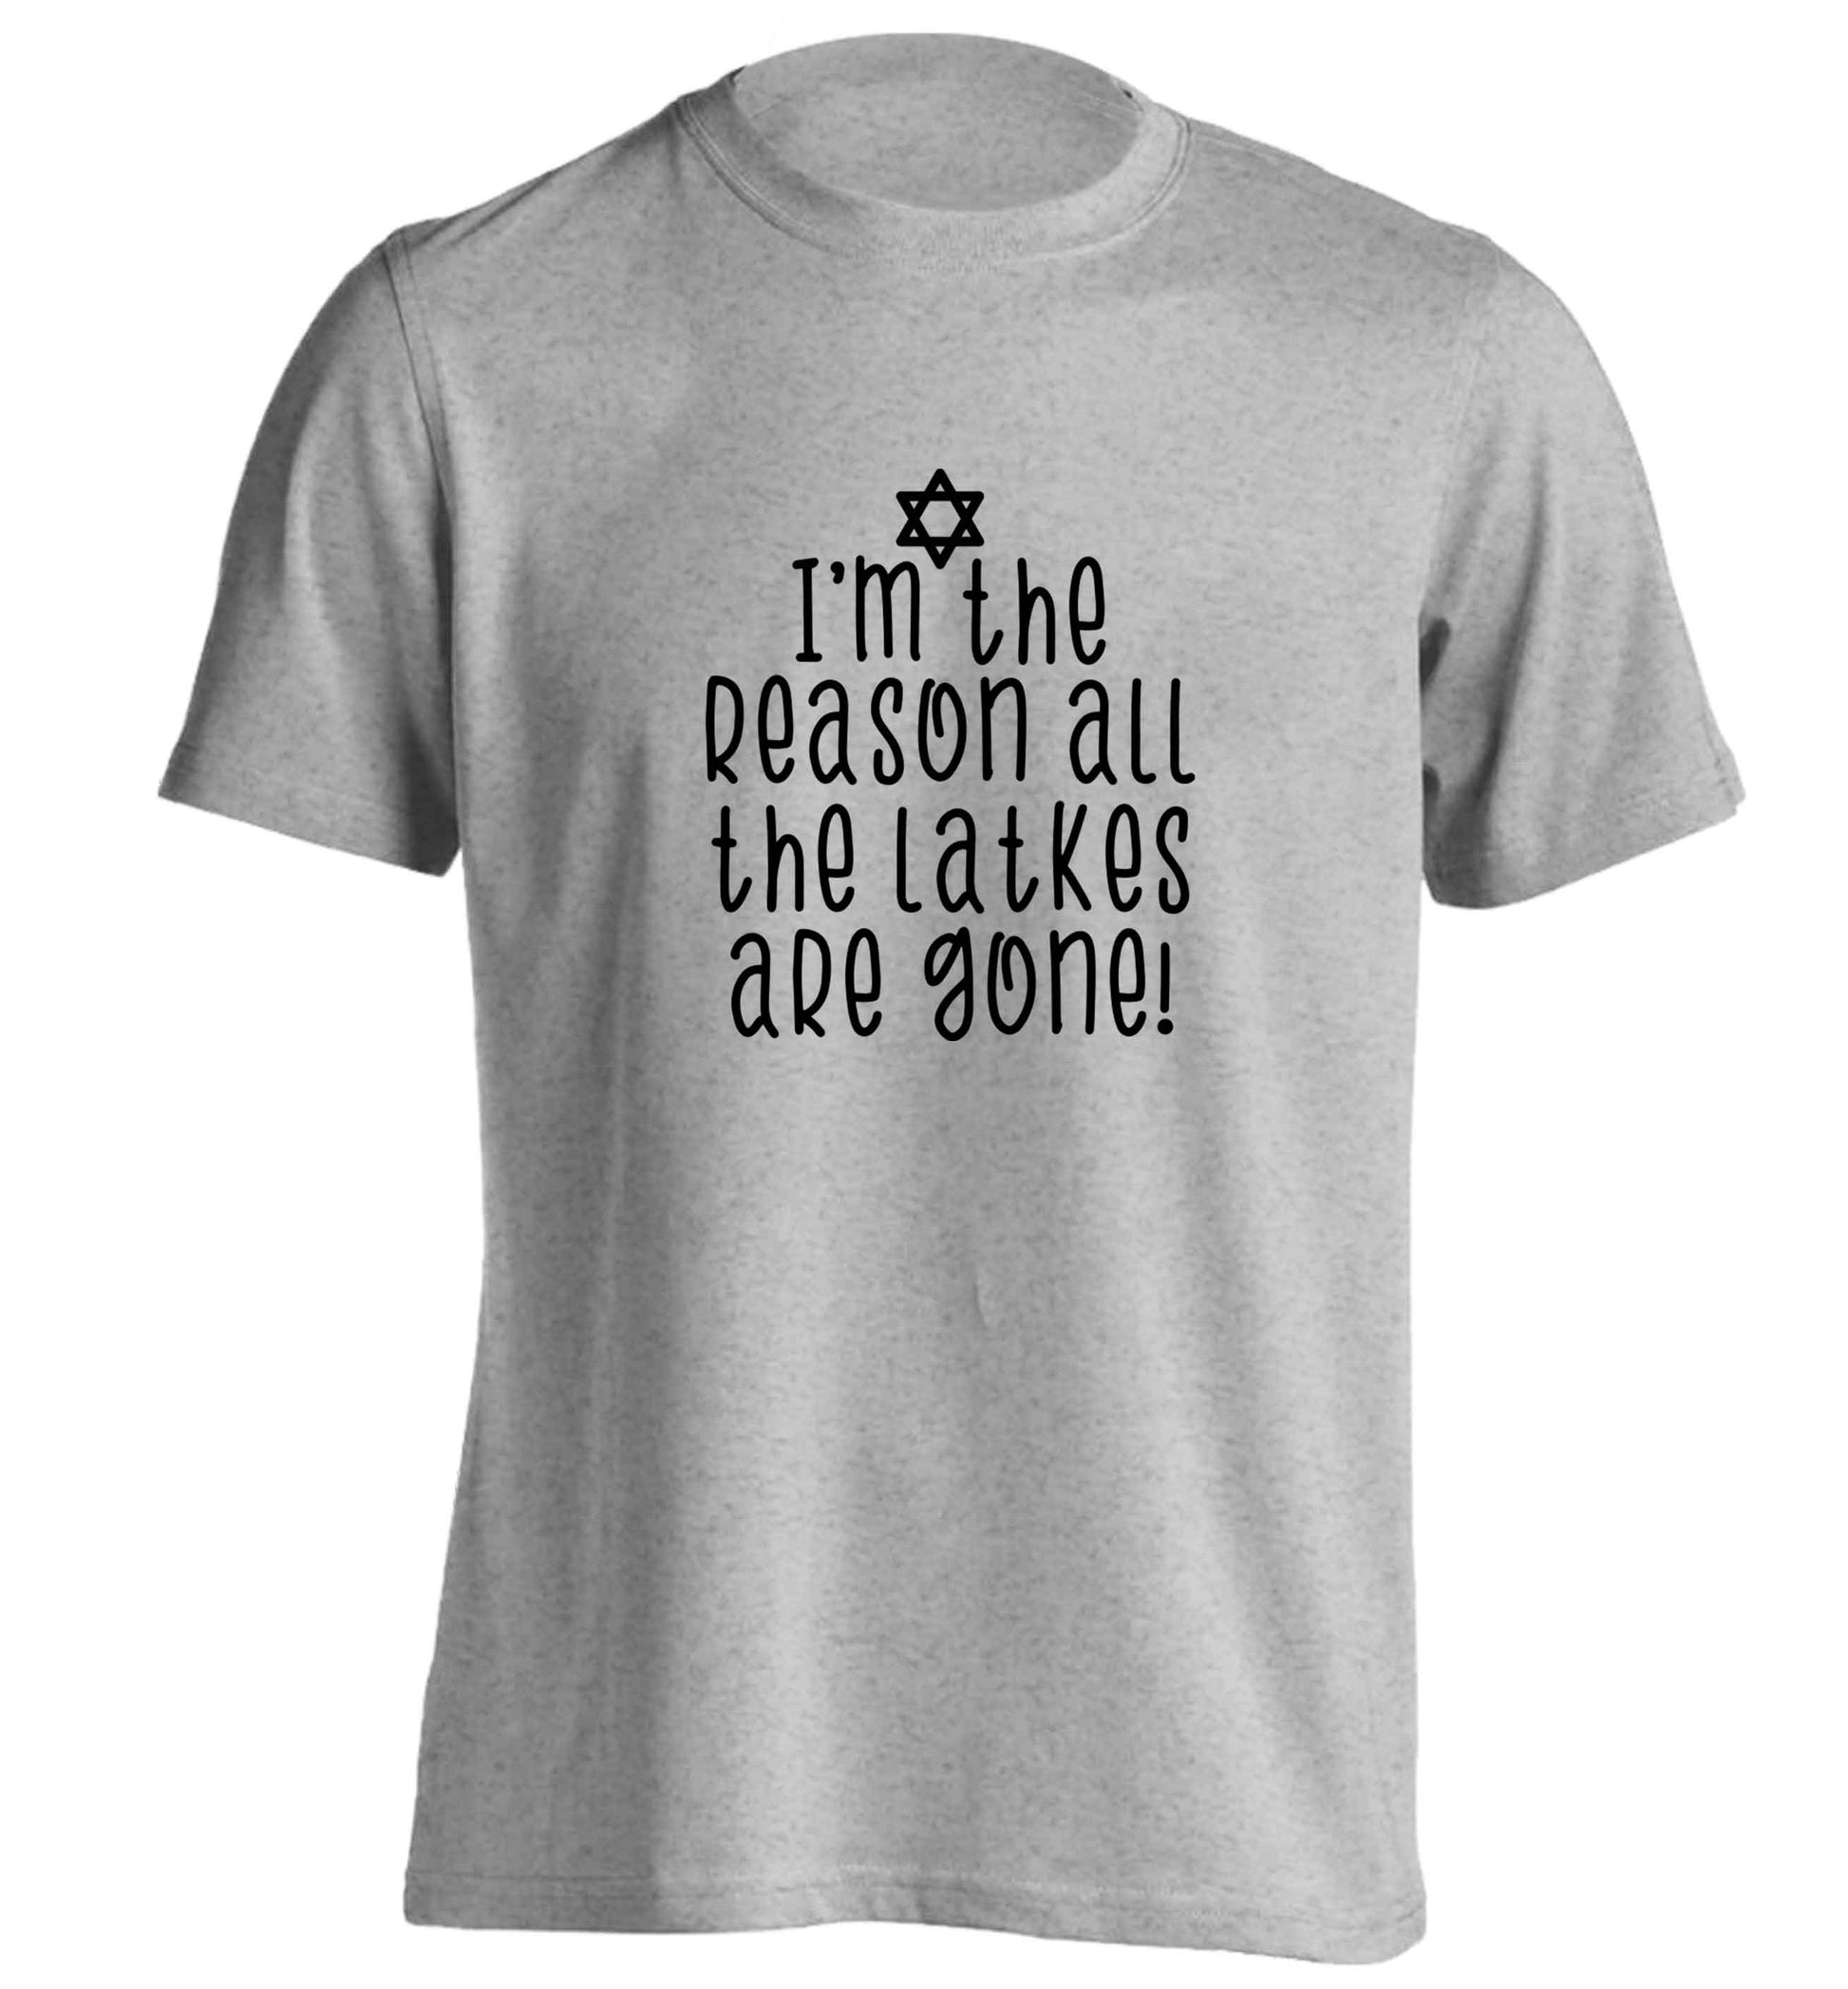 I'm the reason all the latkes are gone adults unisex grey Tshirt 2XL